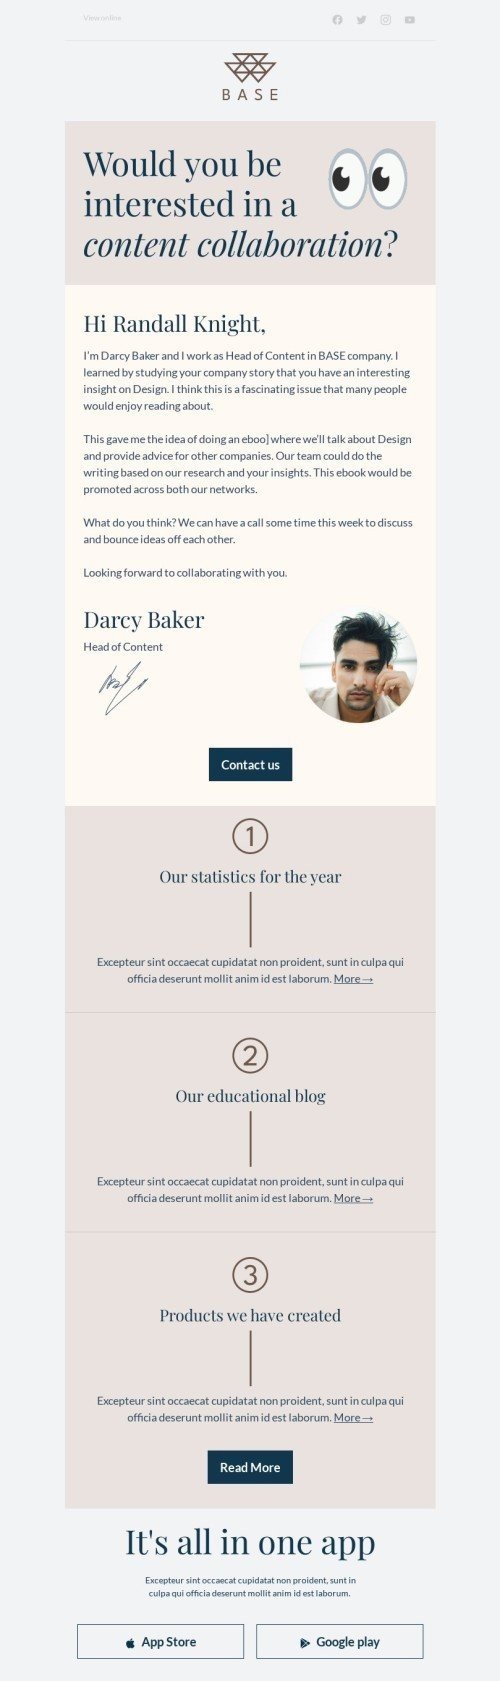 Outreach email template "Сontent collaboration" for fashion industry desktop view